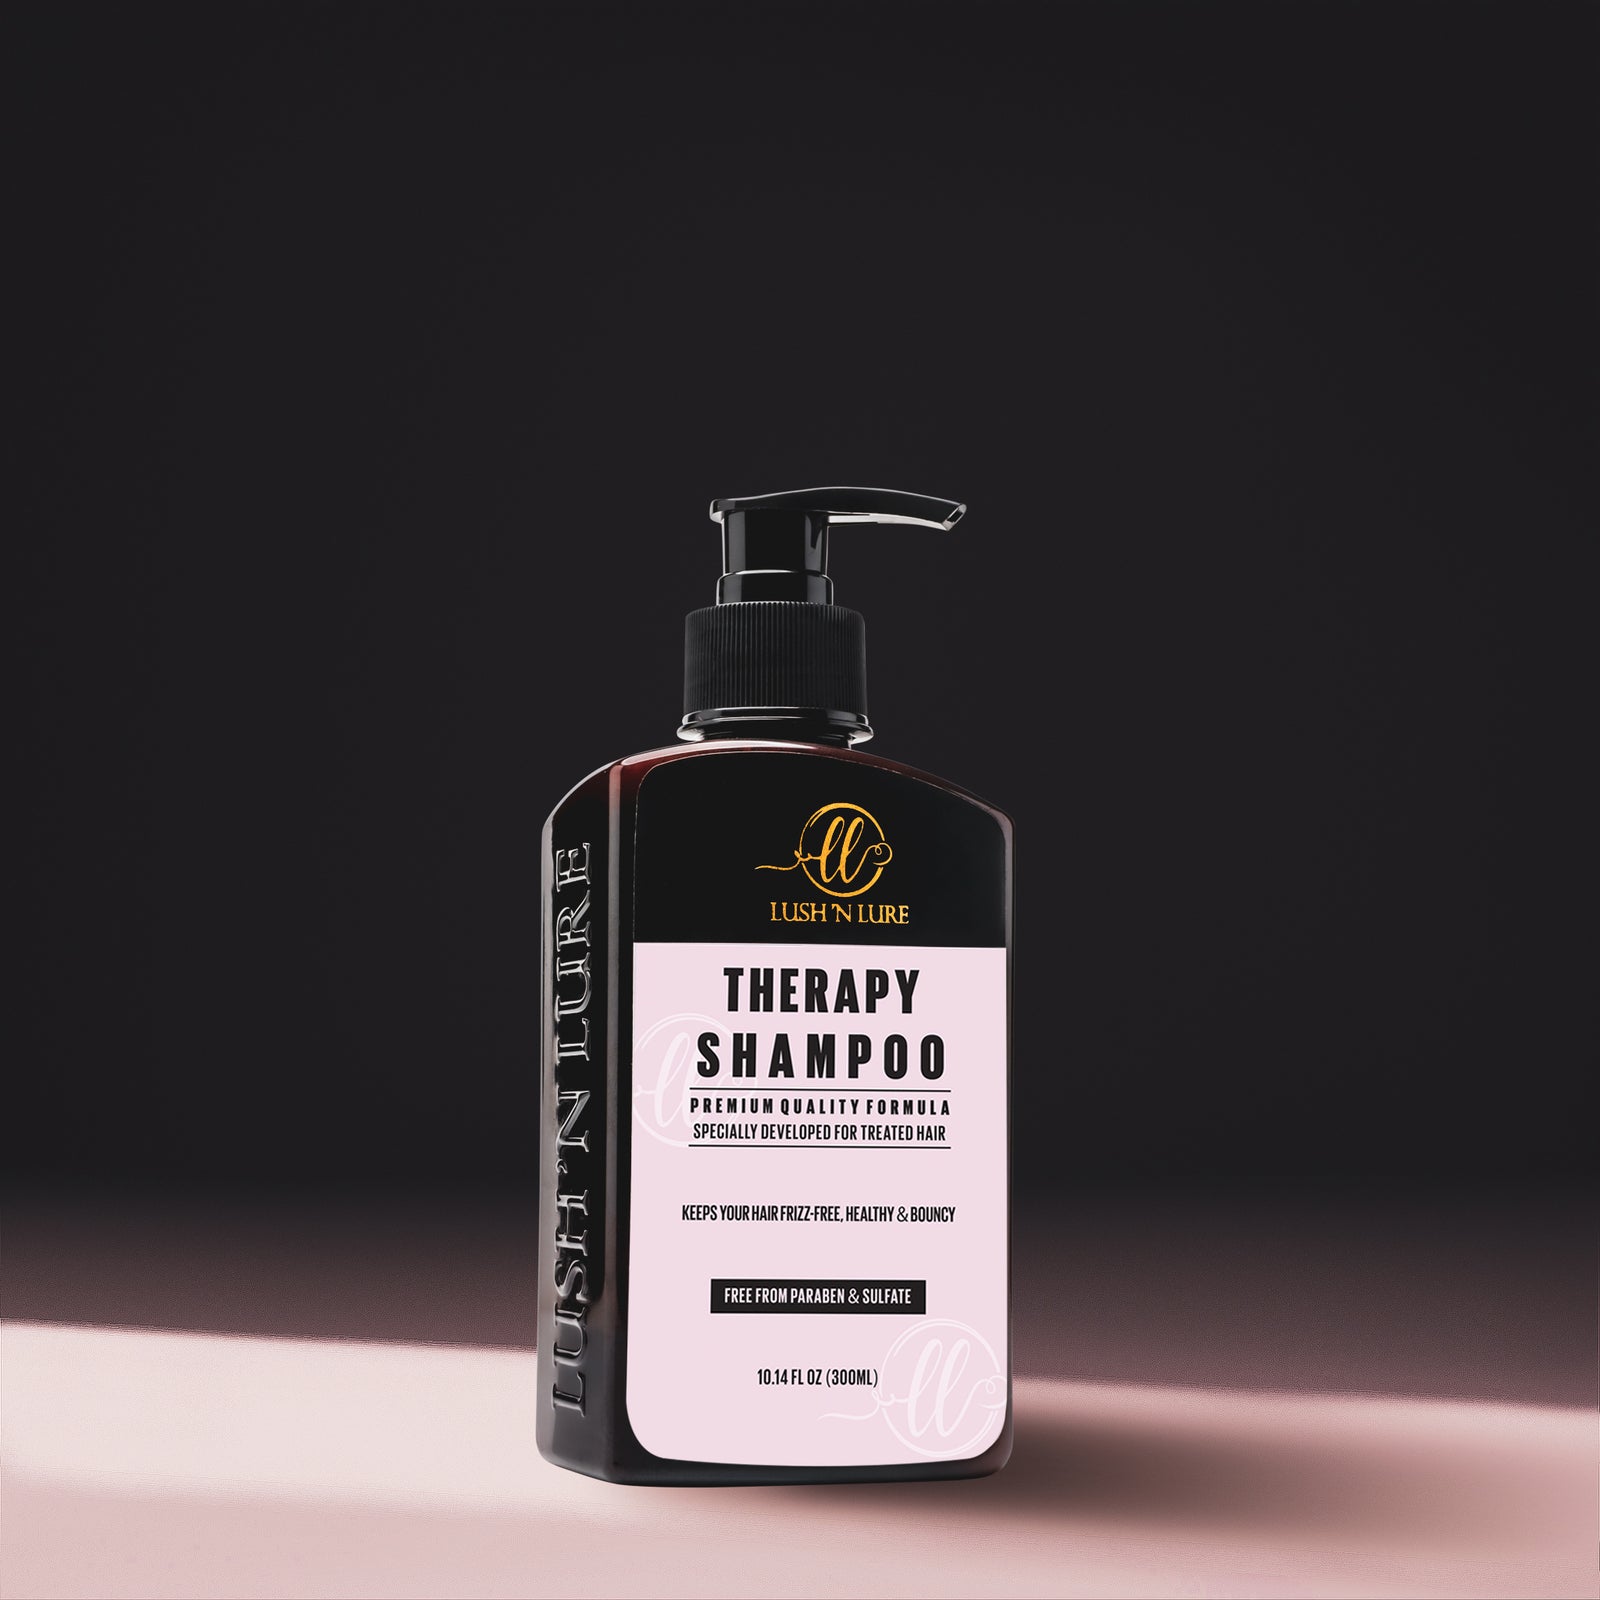 "Image displaying LUSH 'N LURE Sulfate & Paraben Free Shampoo, specially formulated for keratin-treated hair, providing gentle cleansing and maintaining keratin treatment integrity."